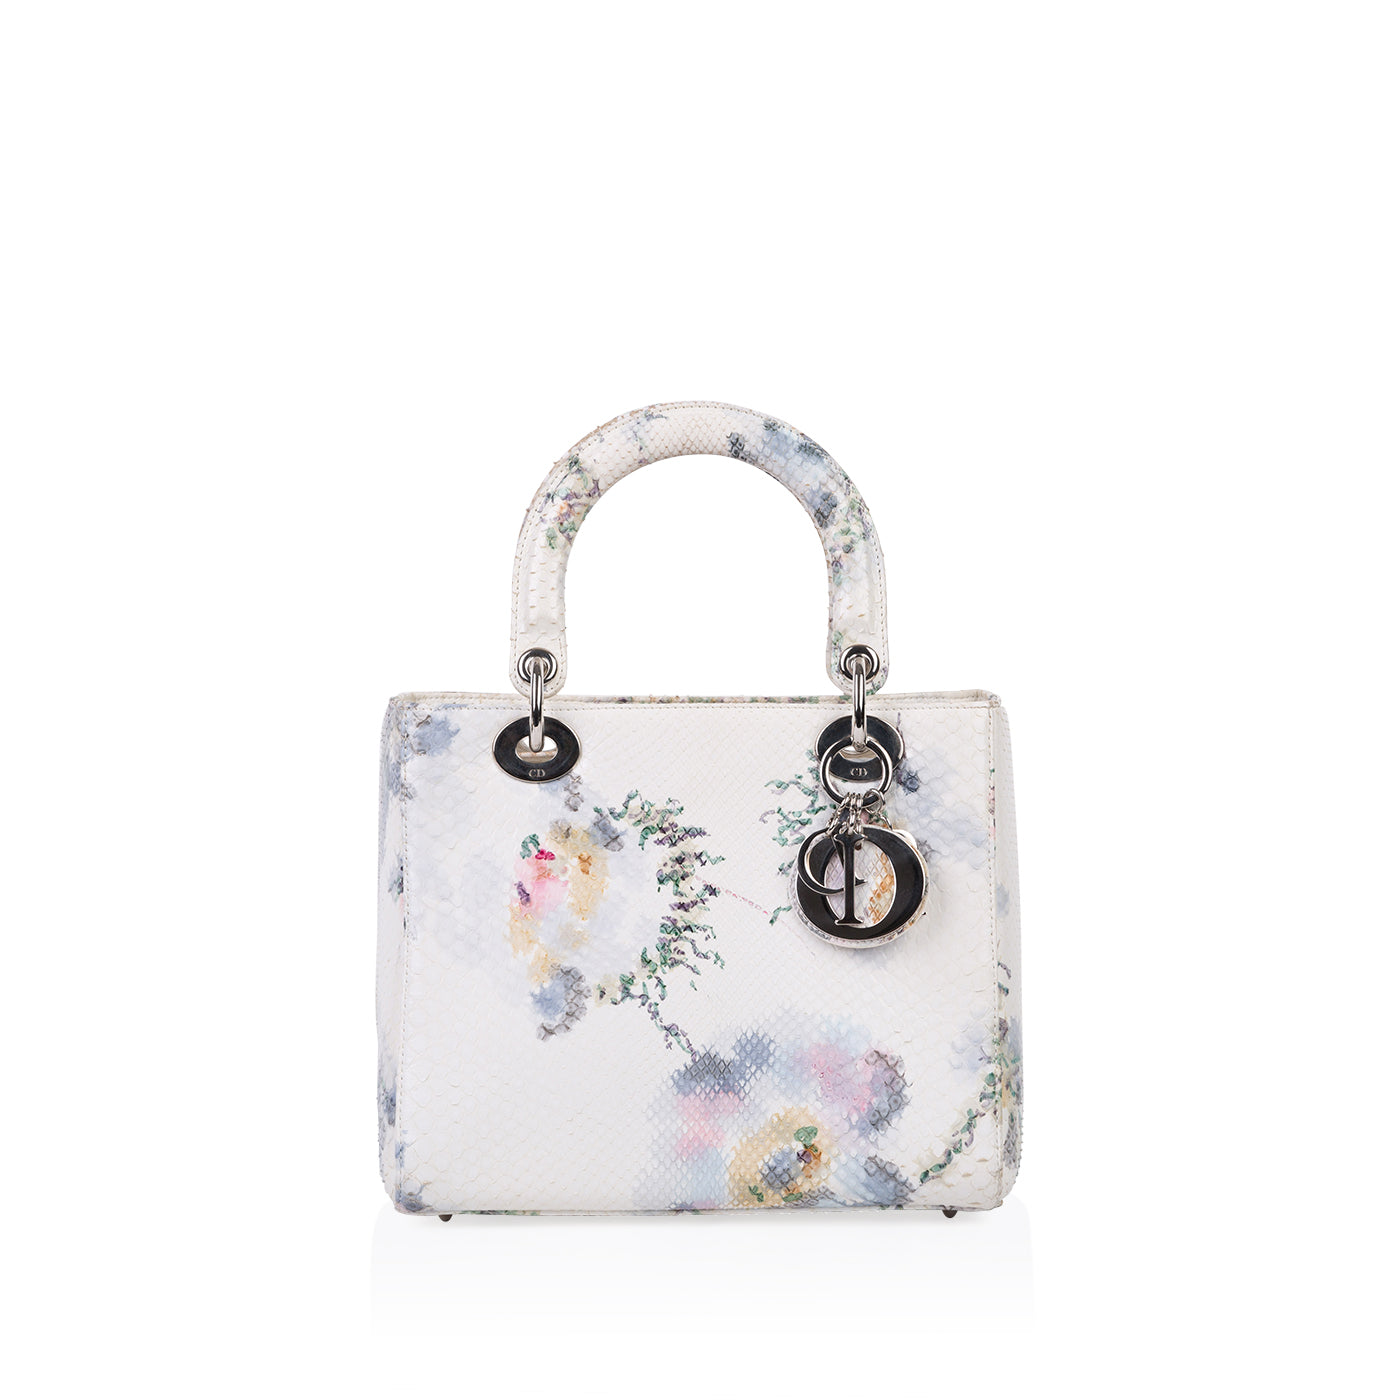 The New Micro Lady Dior Bag is Covered in 1,100 Hand-Applied